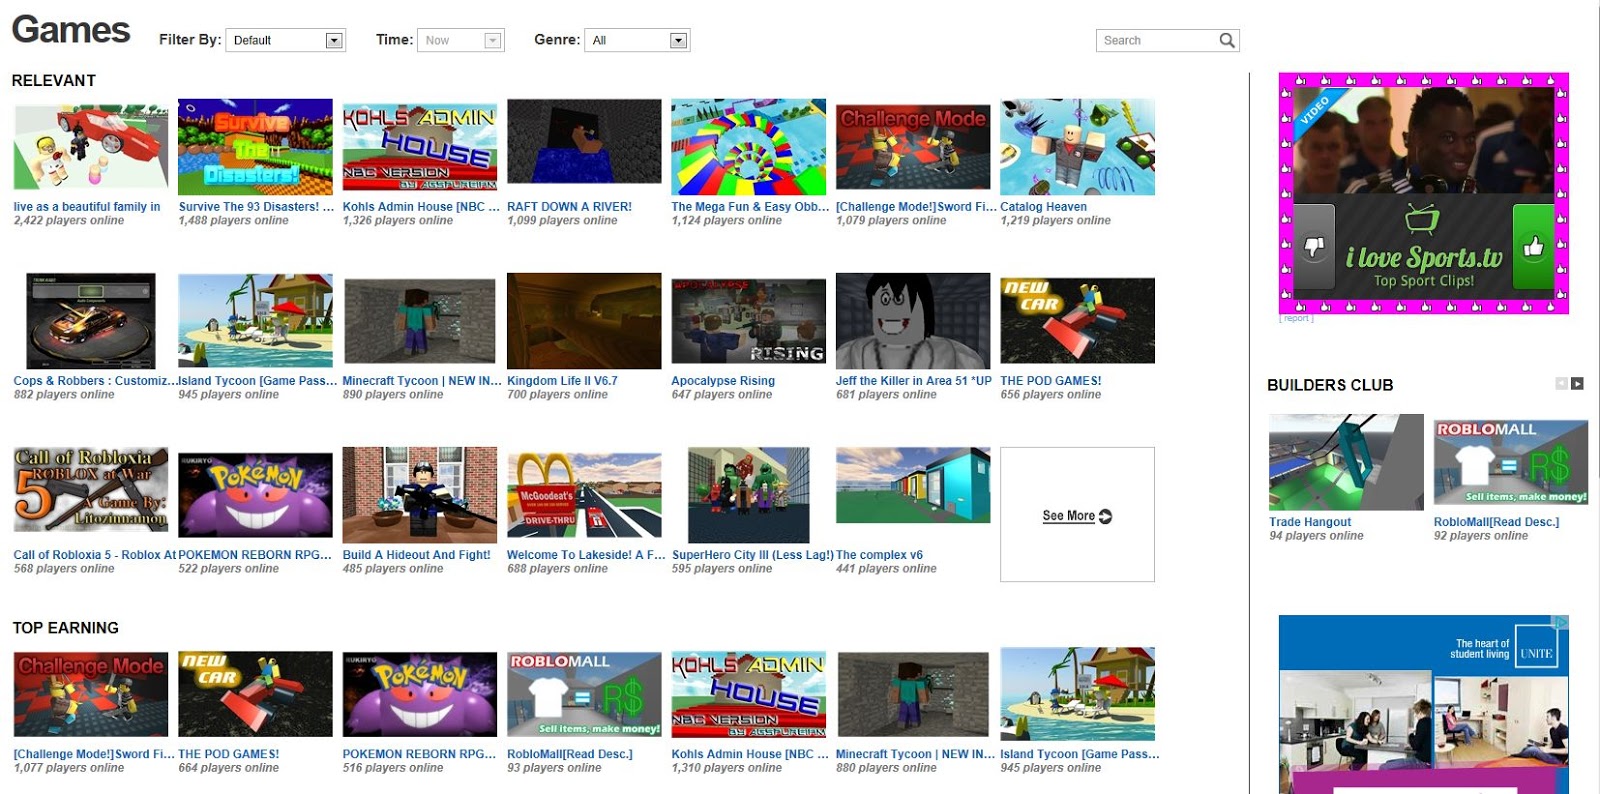 Unofficial Roblox Roblox Games Page Massive Layout Update New Look 2013 - how to get bc roblox